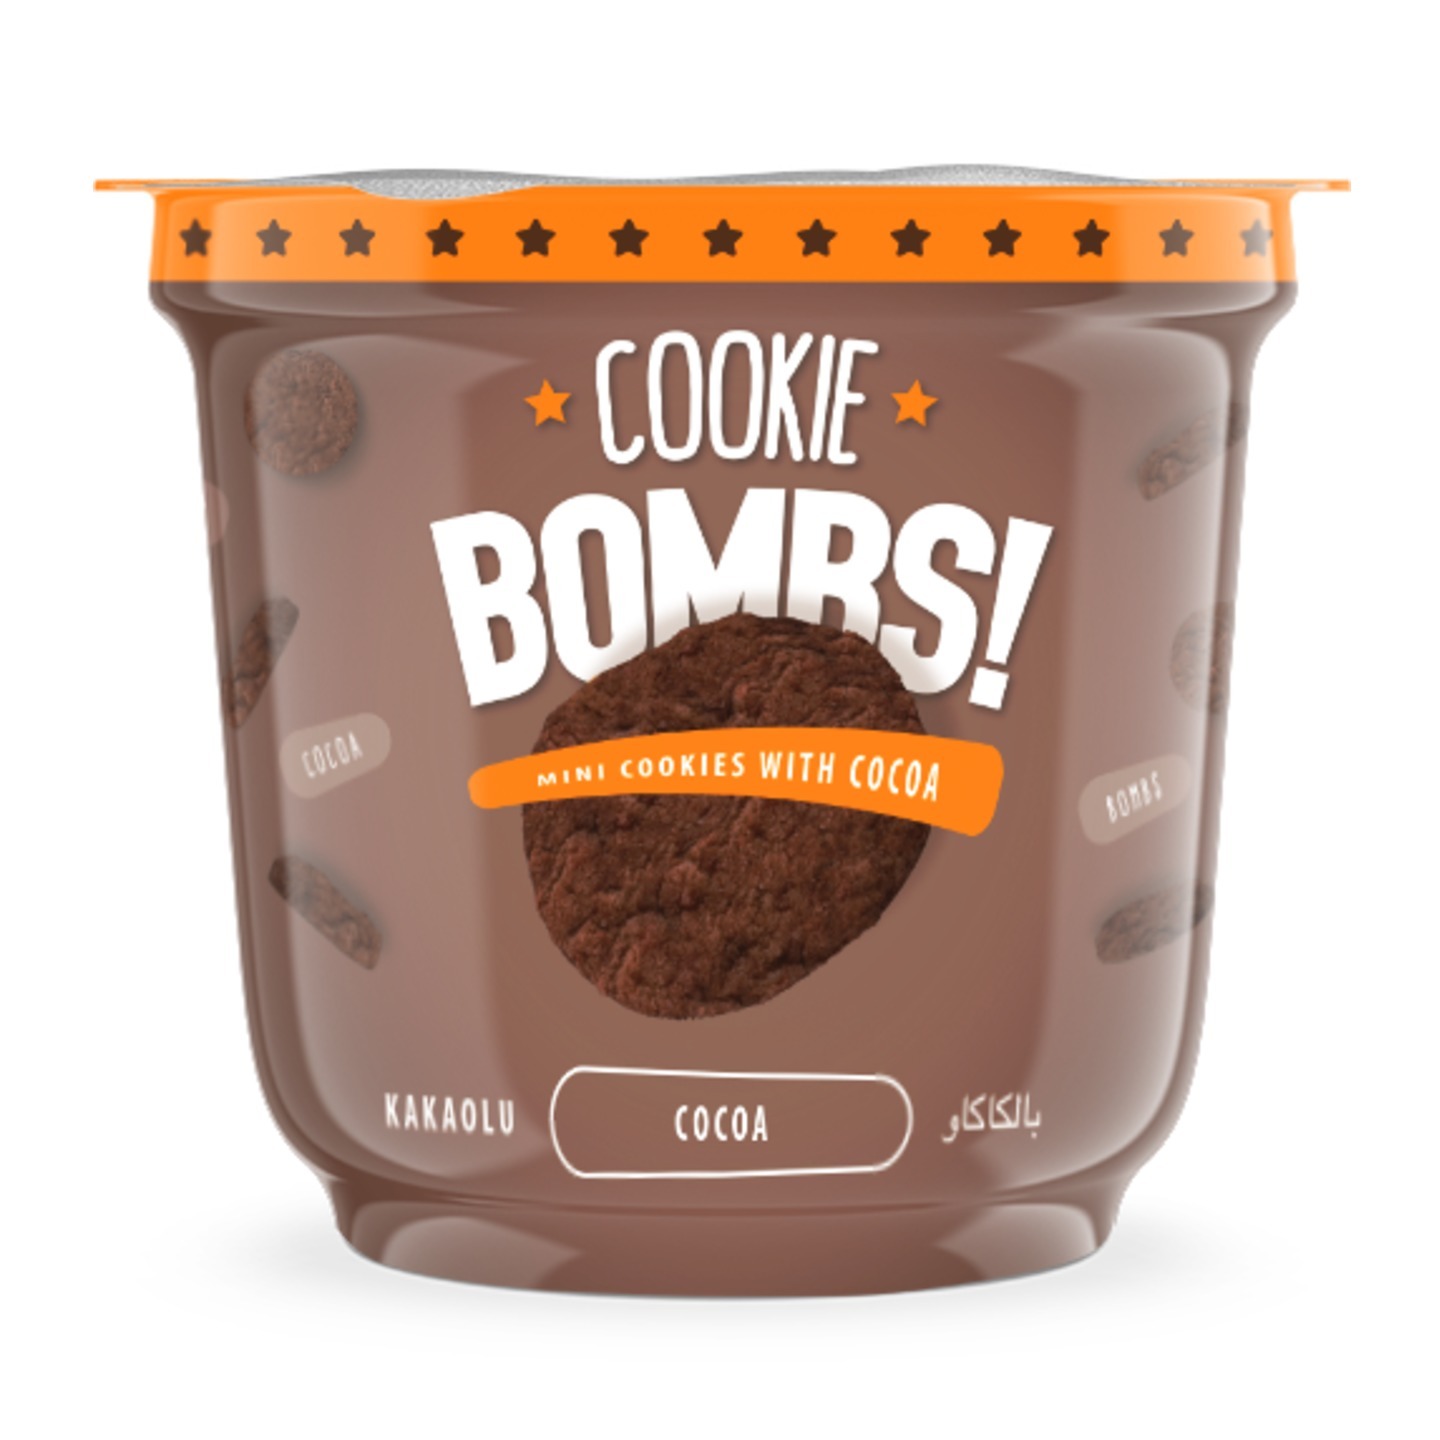 Bombs Mini Cookies with Cocoa Flavor